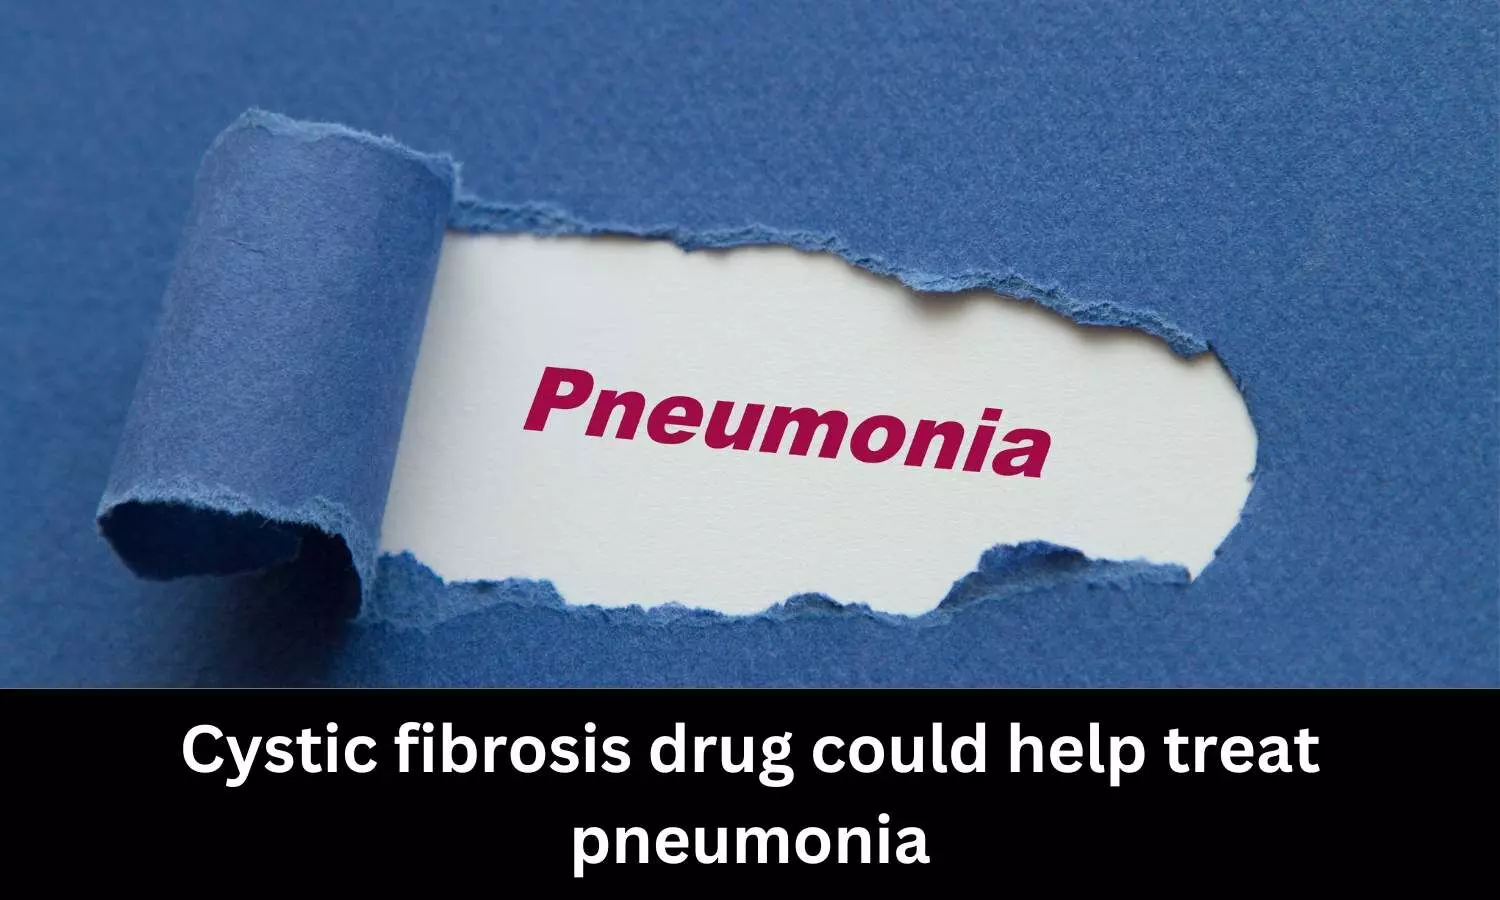 Cystic fibrosis drug could help treat pneumonia